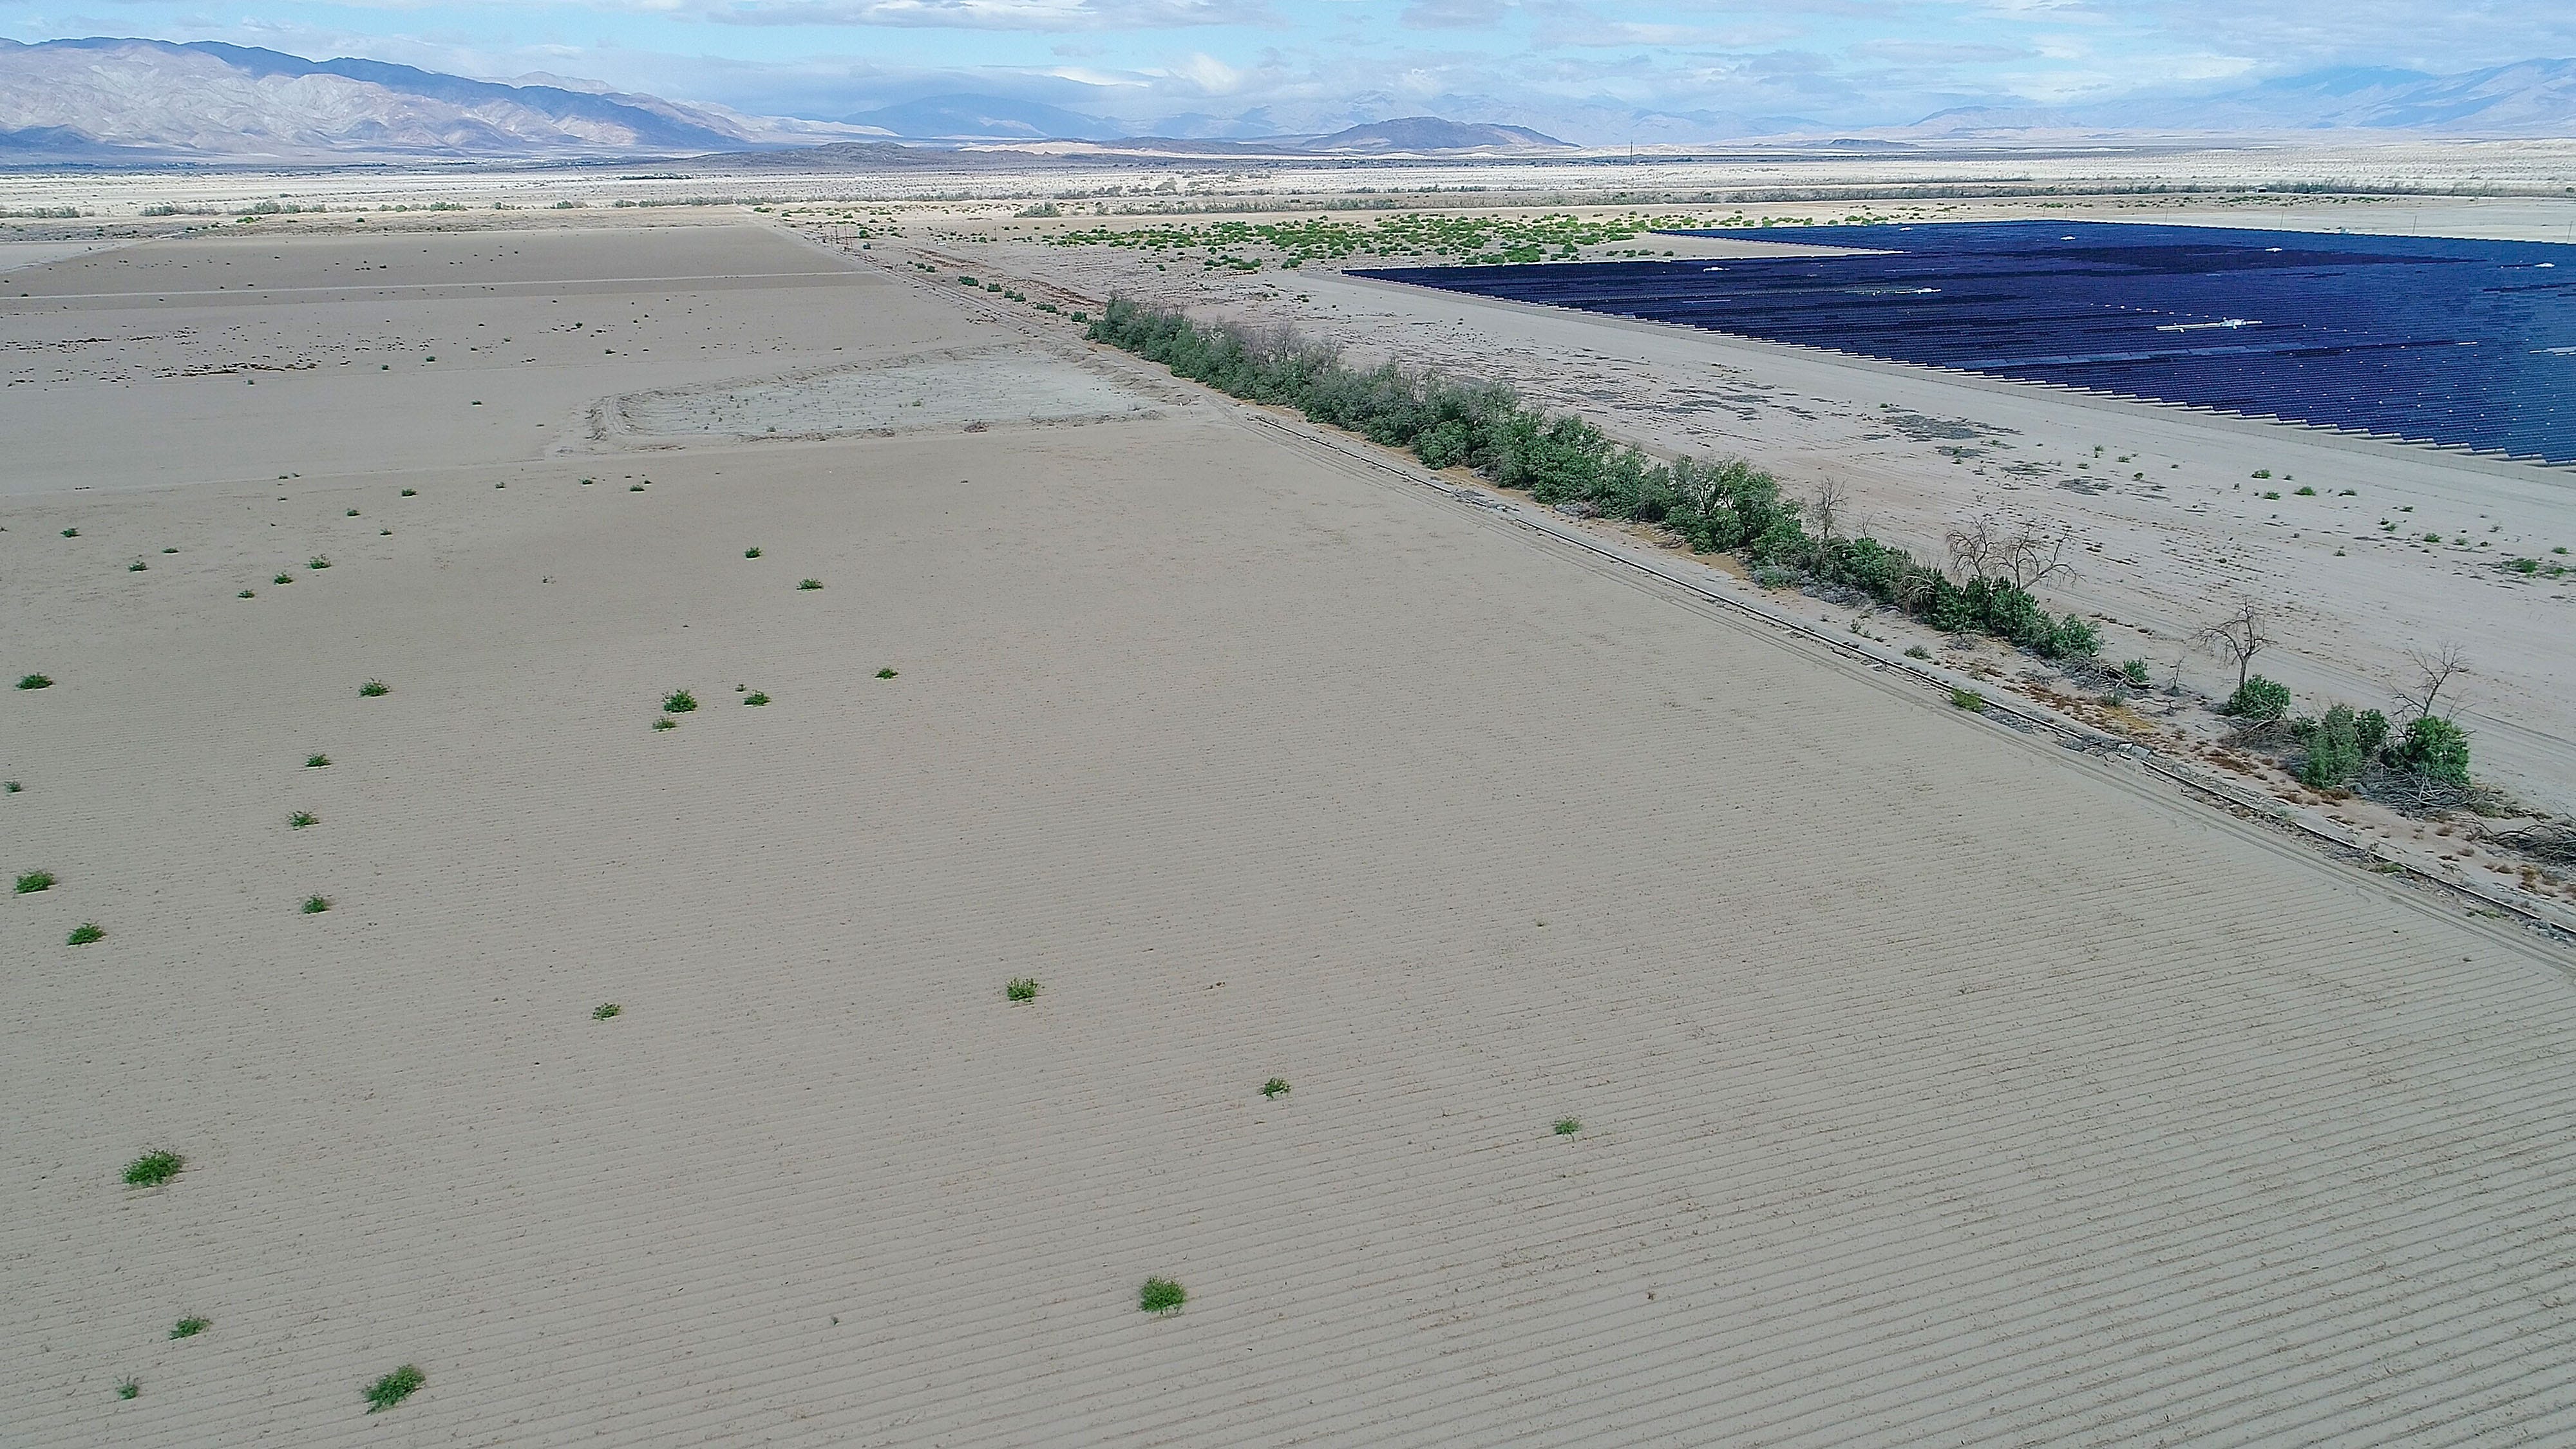 The Seville solar project at Allegretti Ranch, seen from a drone. The undeveloped land in the foreground was prepared for farming by Mike Abatti.